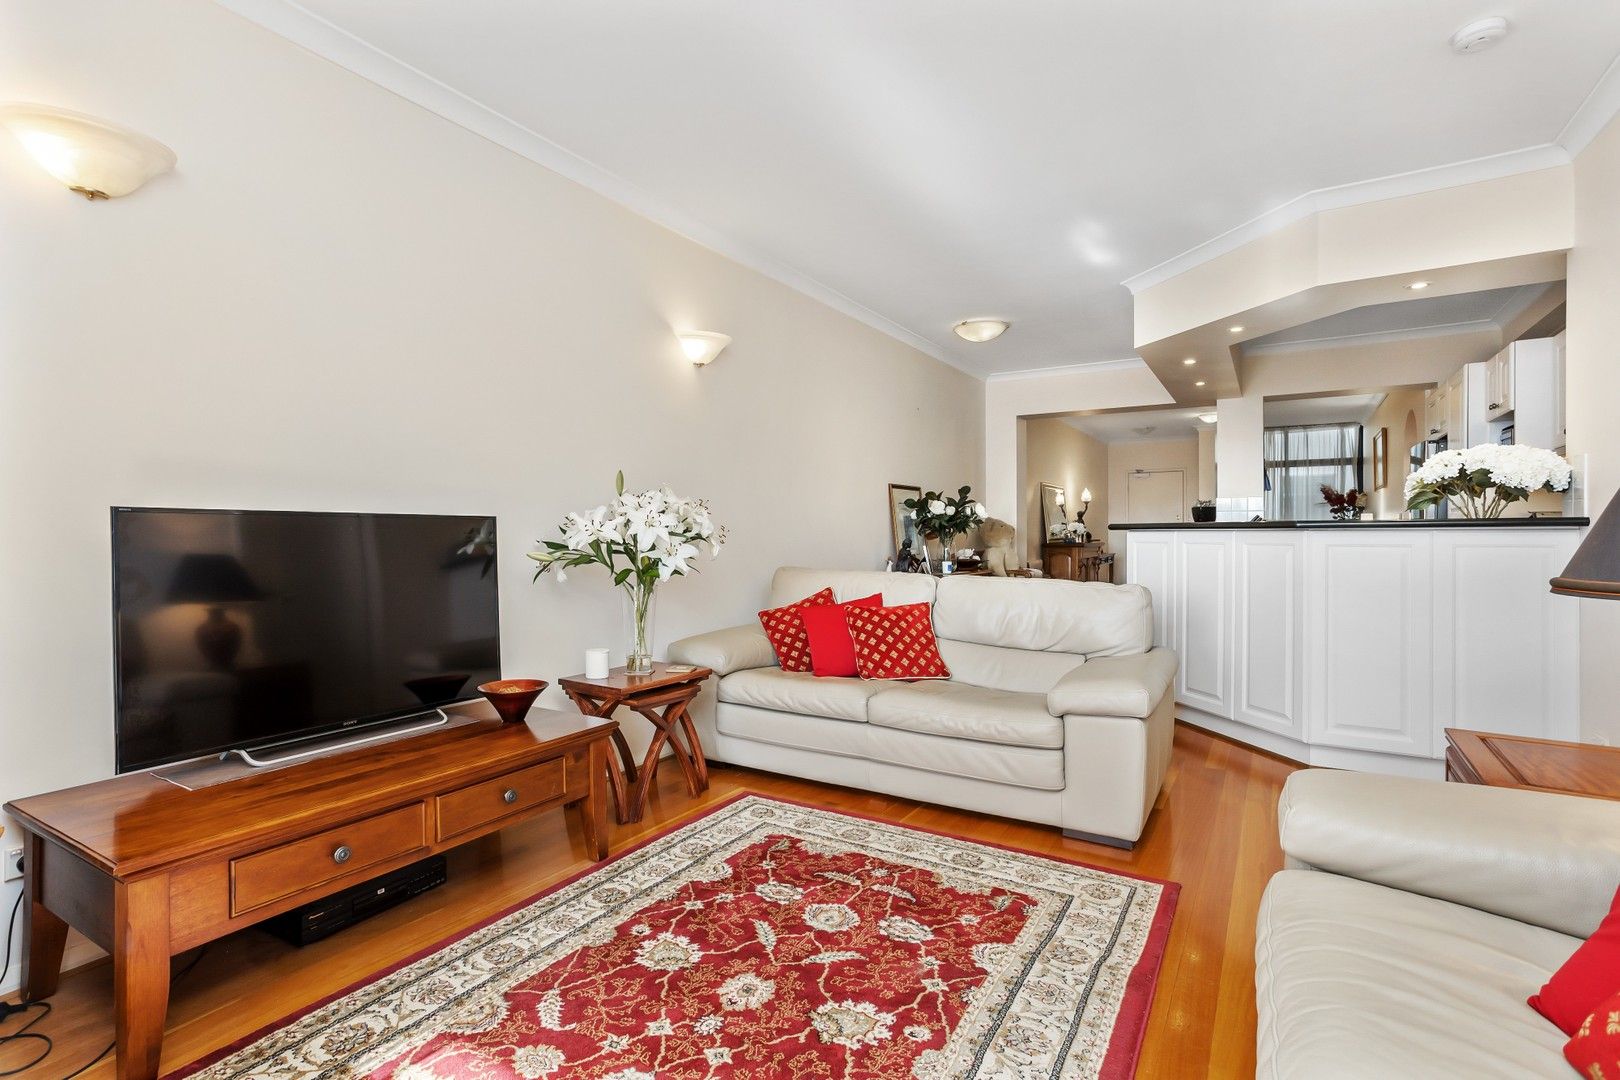 2 bedrooms Apartment / Unit / Flat in 6/12 Parliament Place WEST PERTH WA, 6005